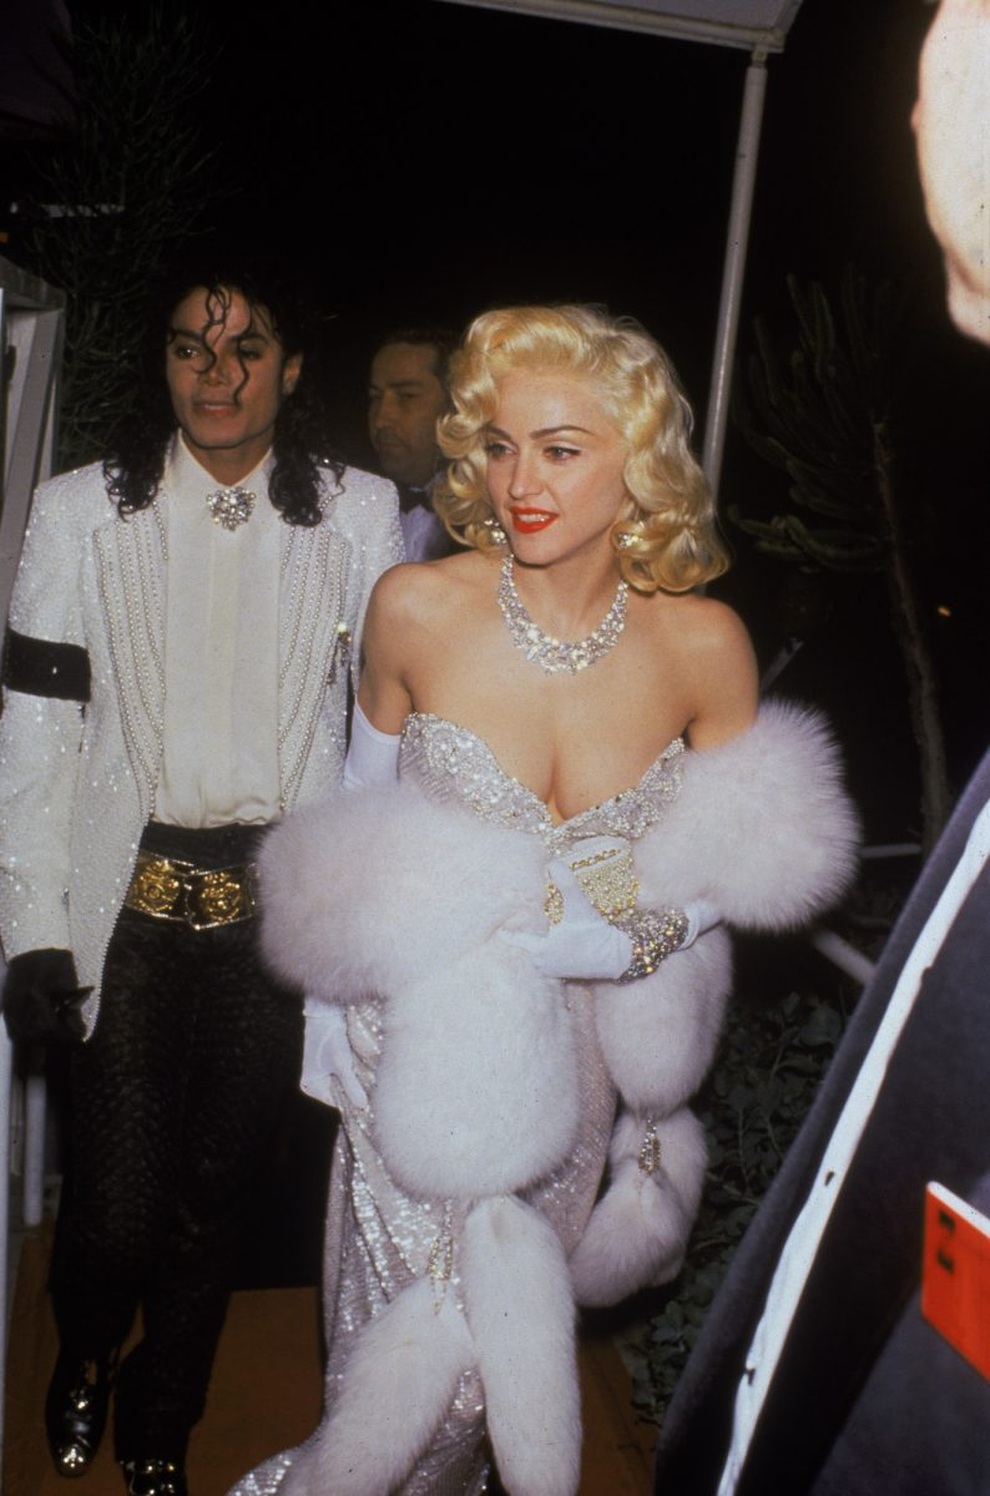 Unknown stories about the special relationship between Michael Jackson and Madonna - 1